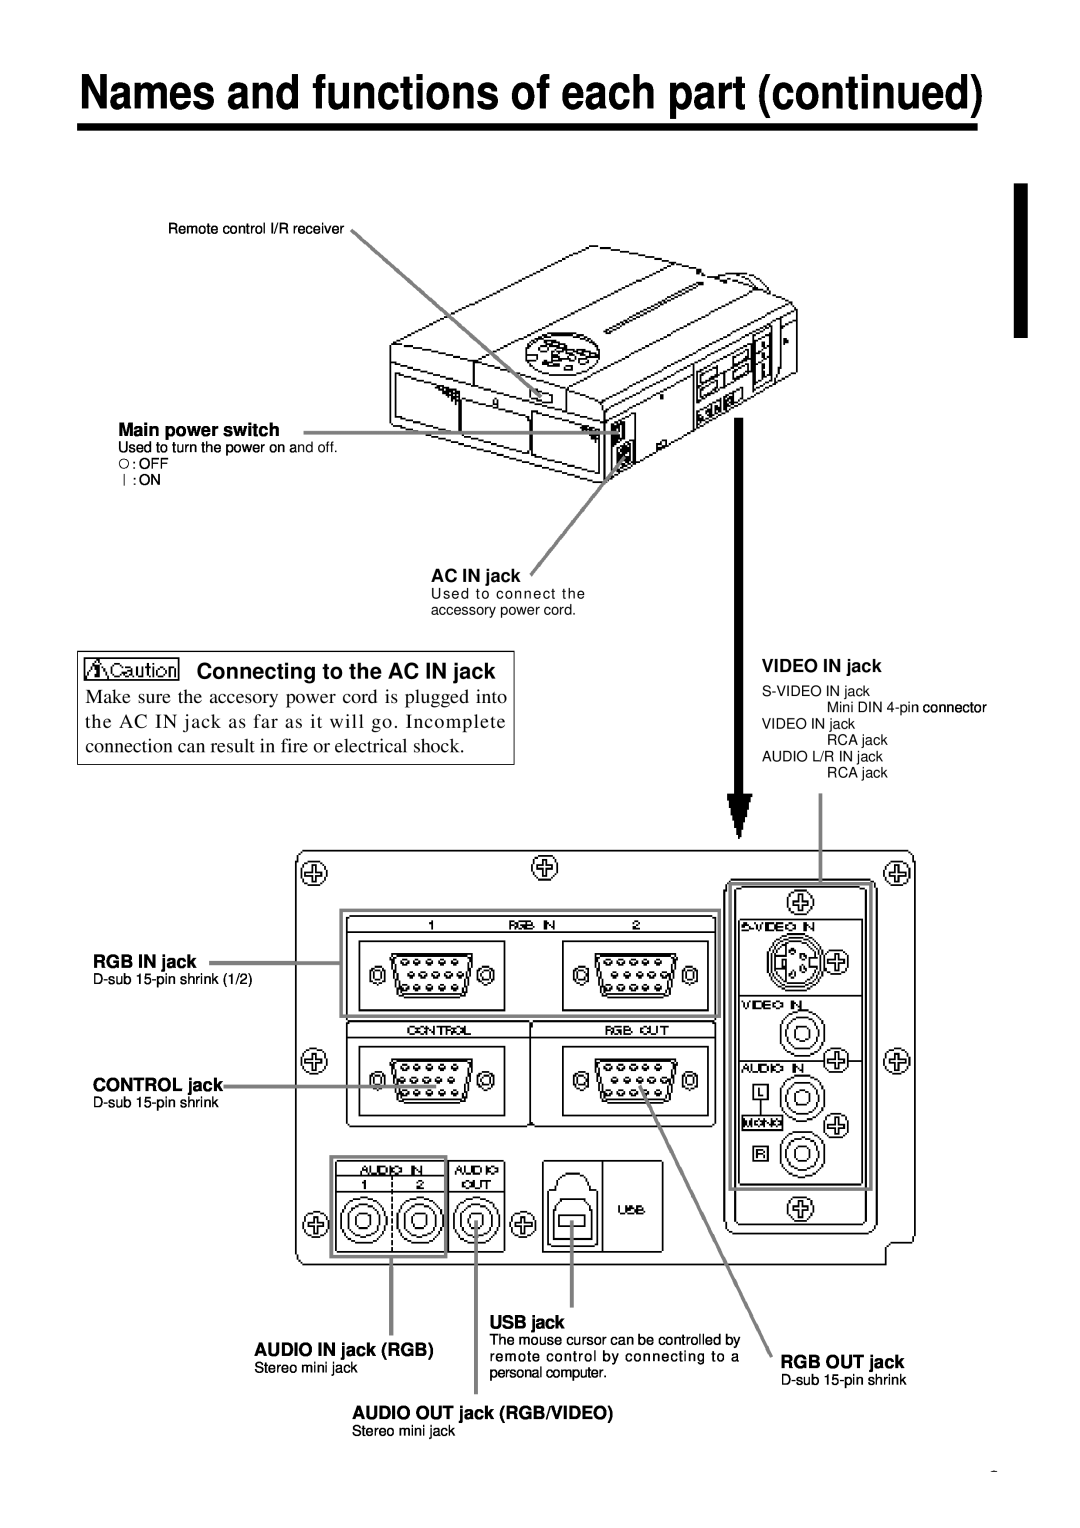 Polaroid PV 360 specifications Names and functions of each part continued, Connecting to the AC IN jack 